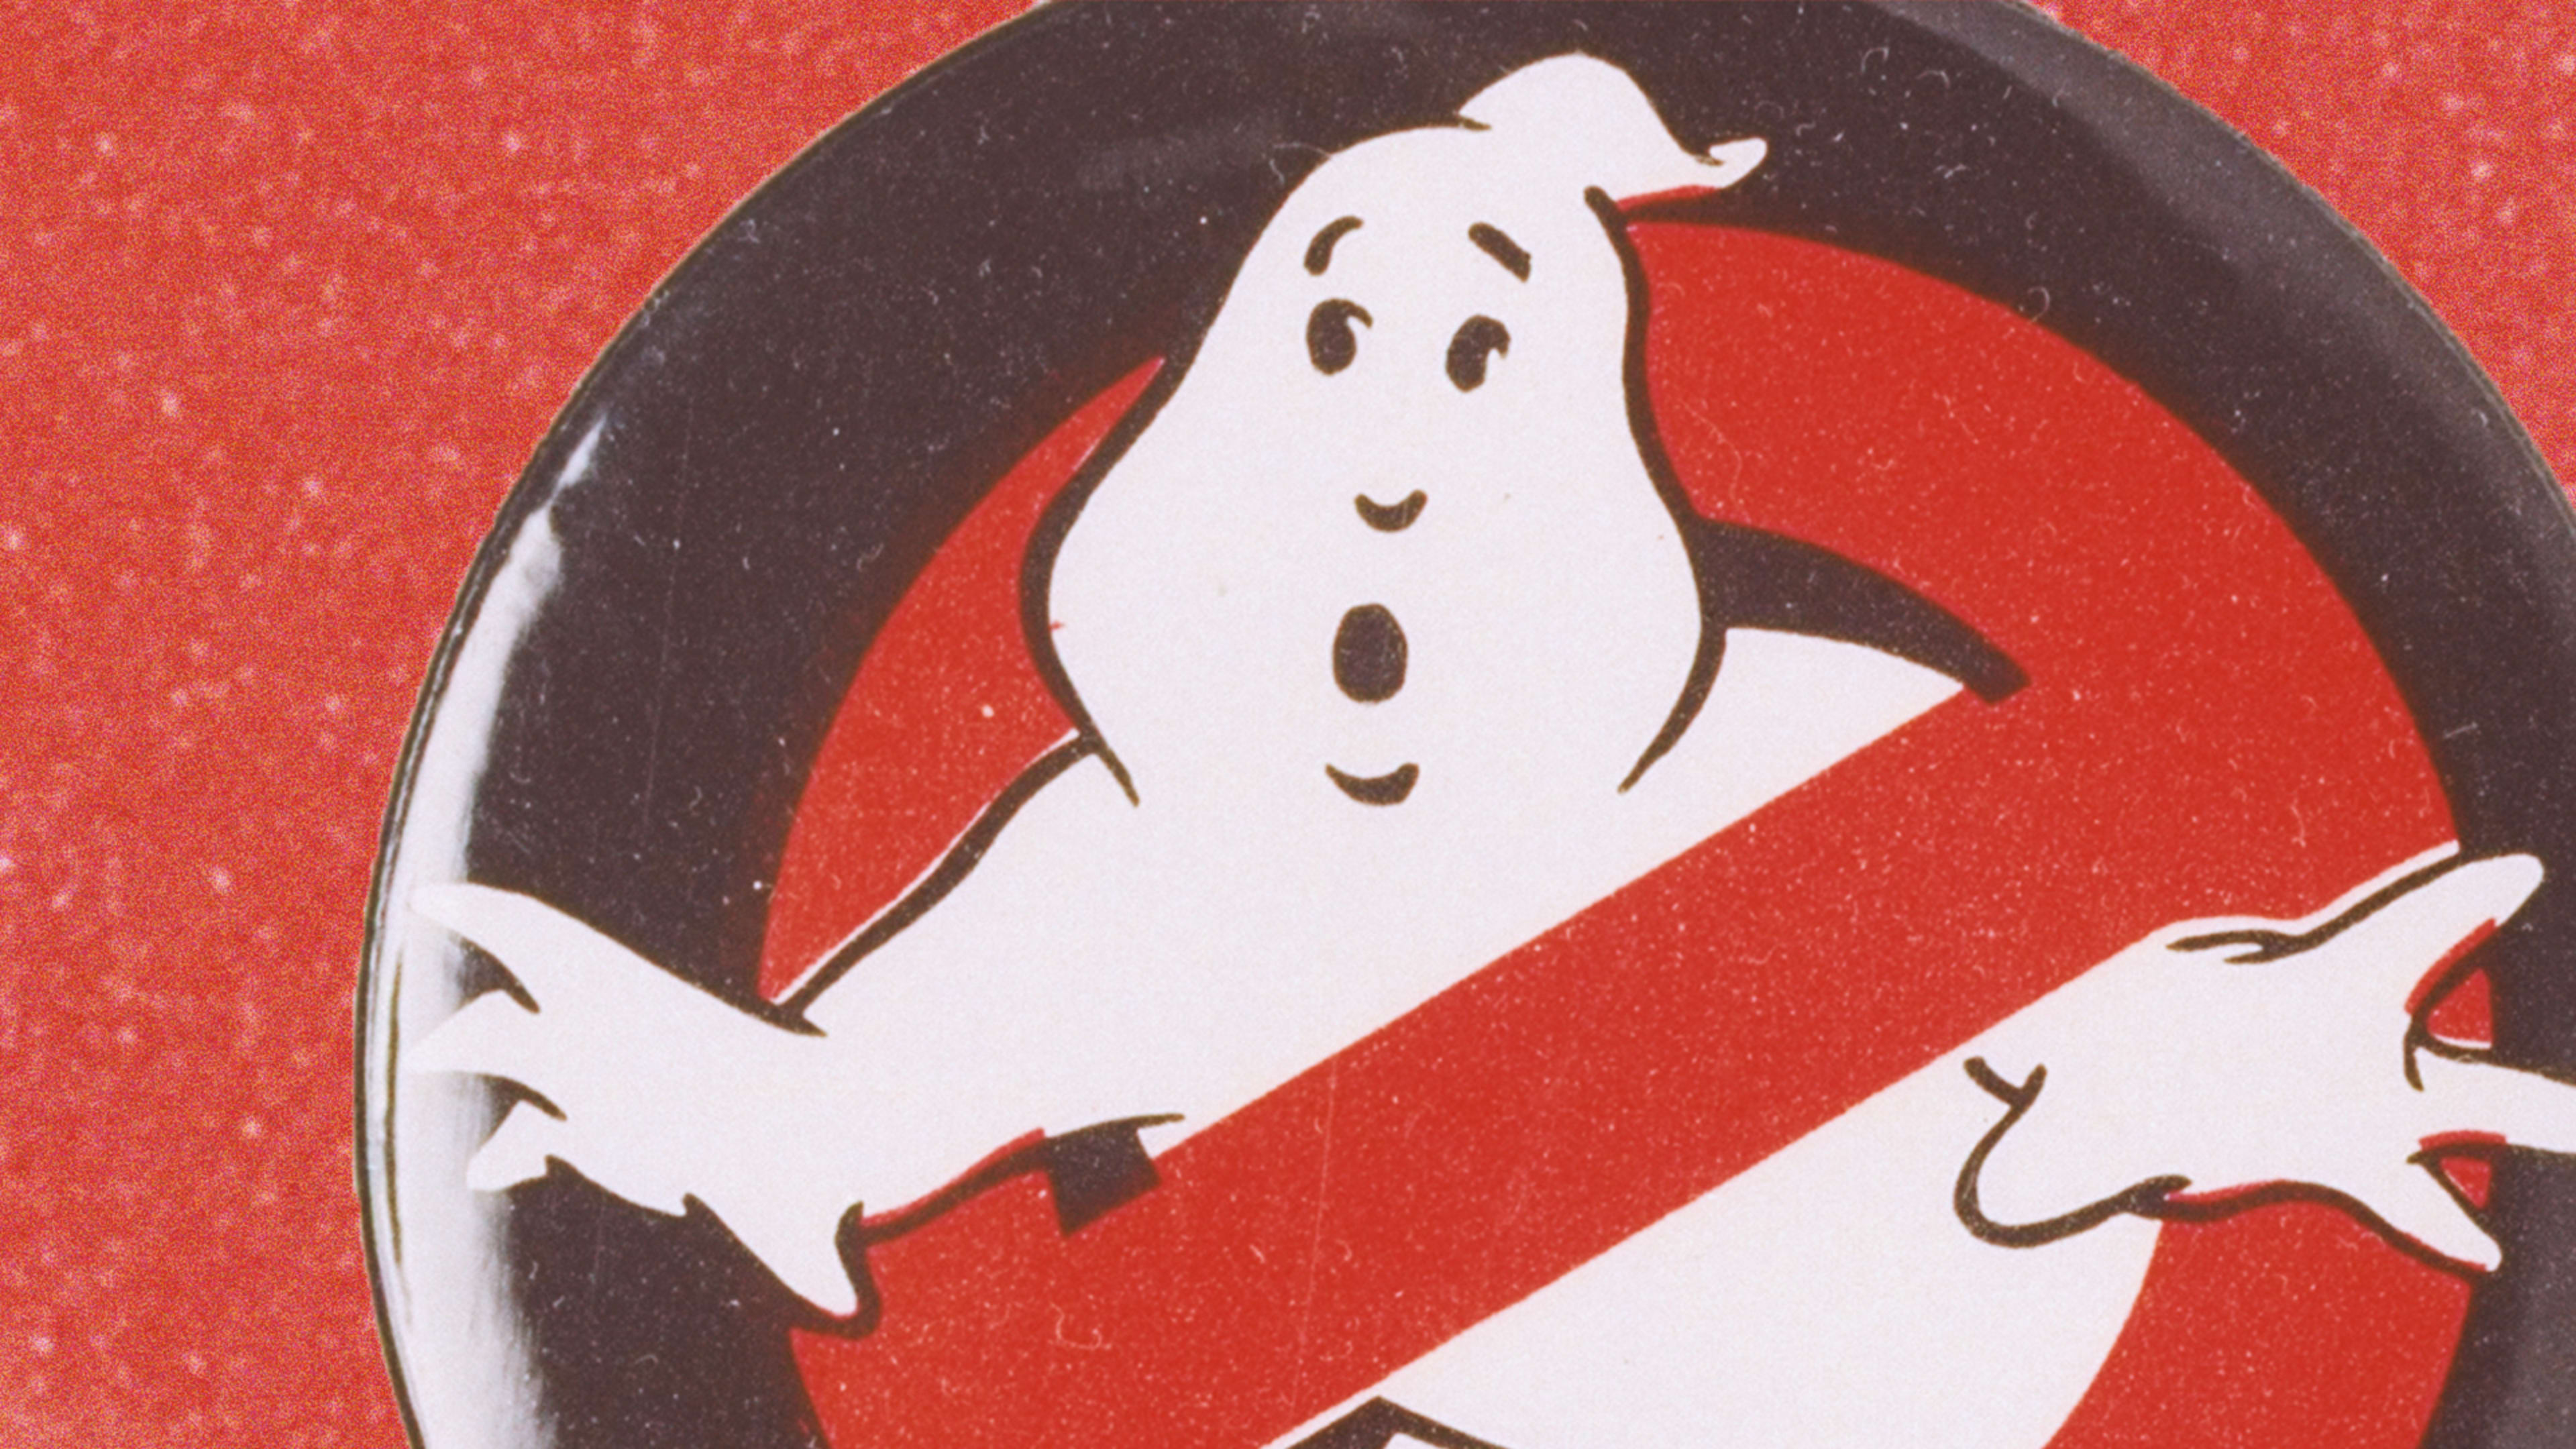 We’re fighting about “Ghostbusters” again because it’s 2016 forever